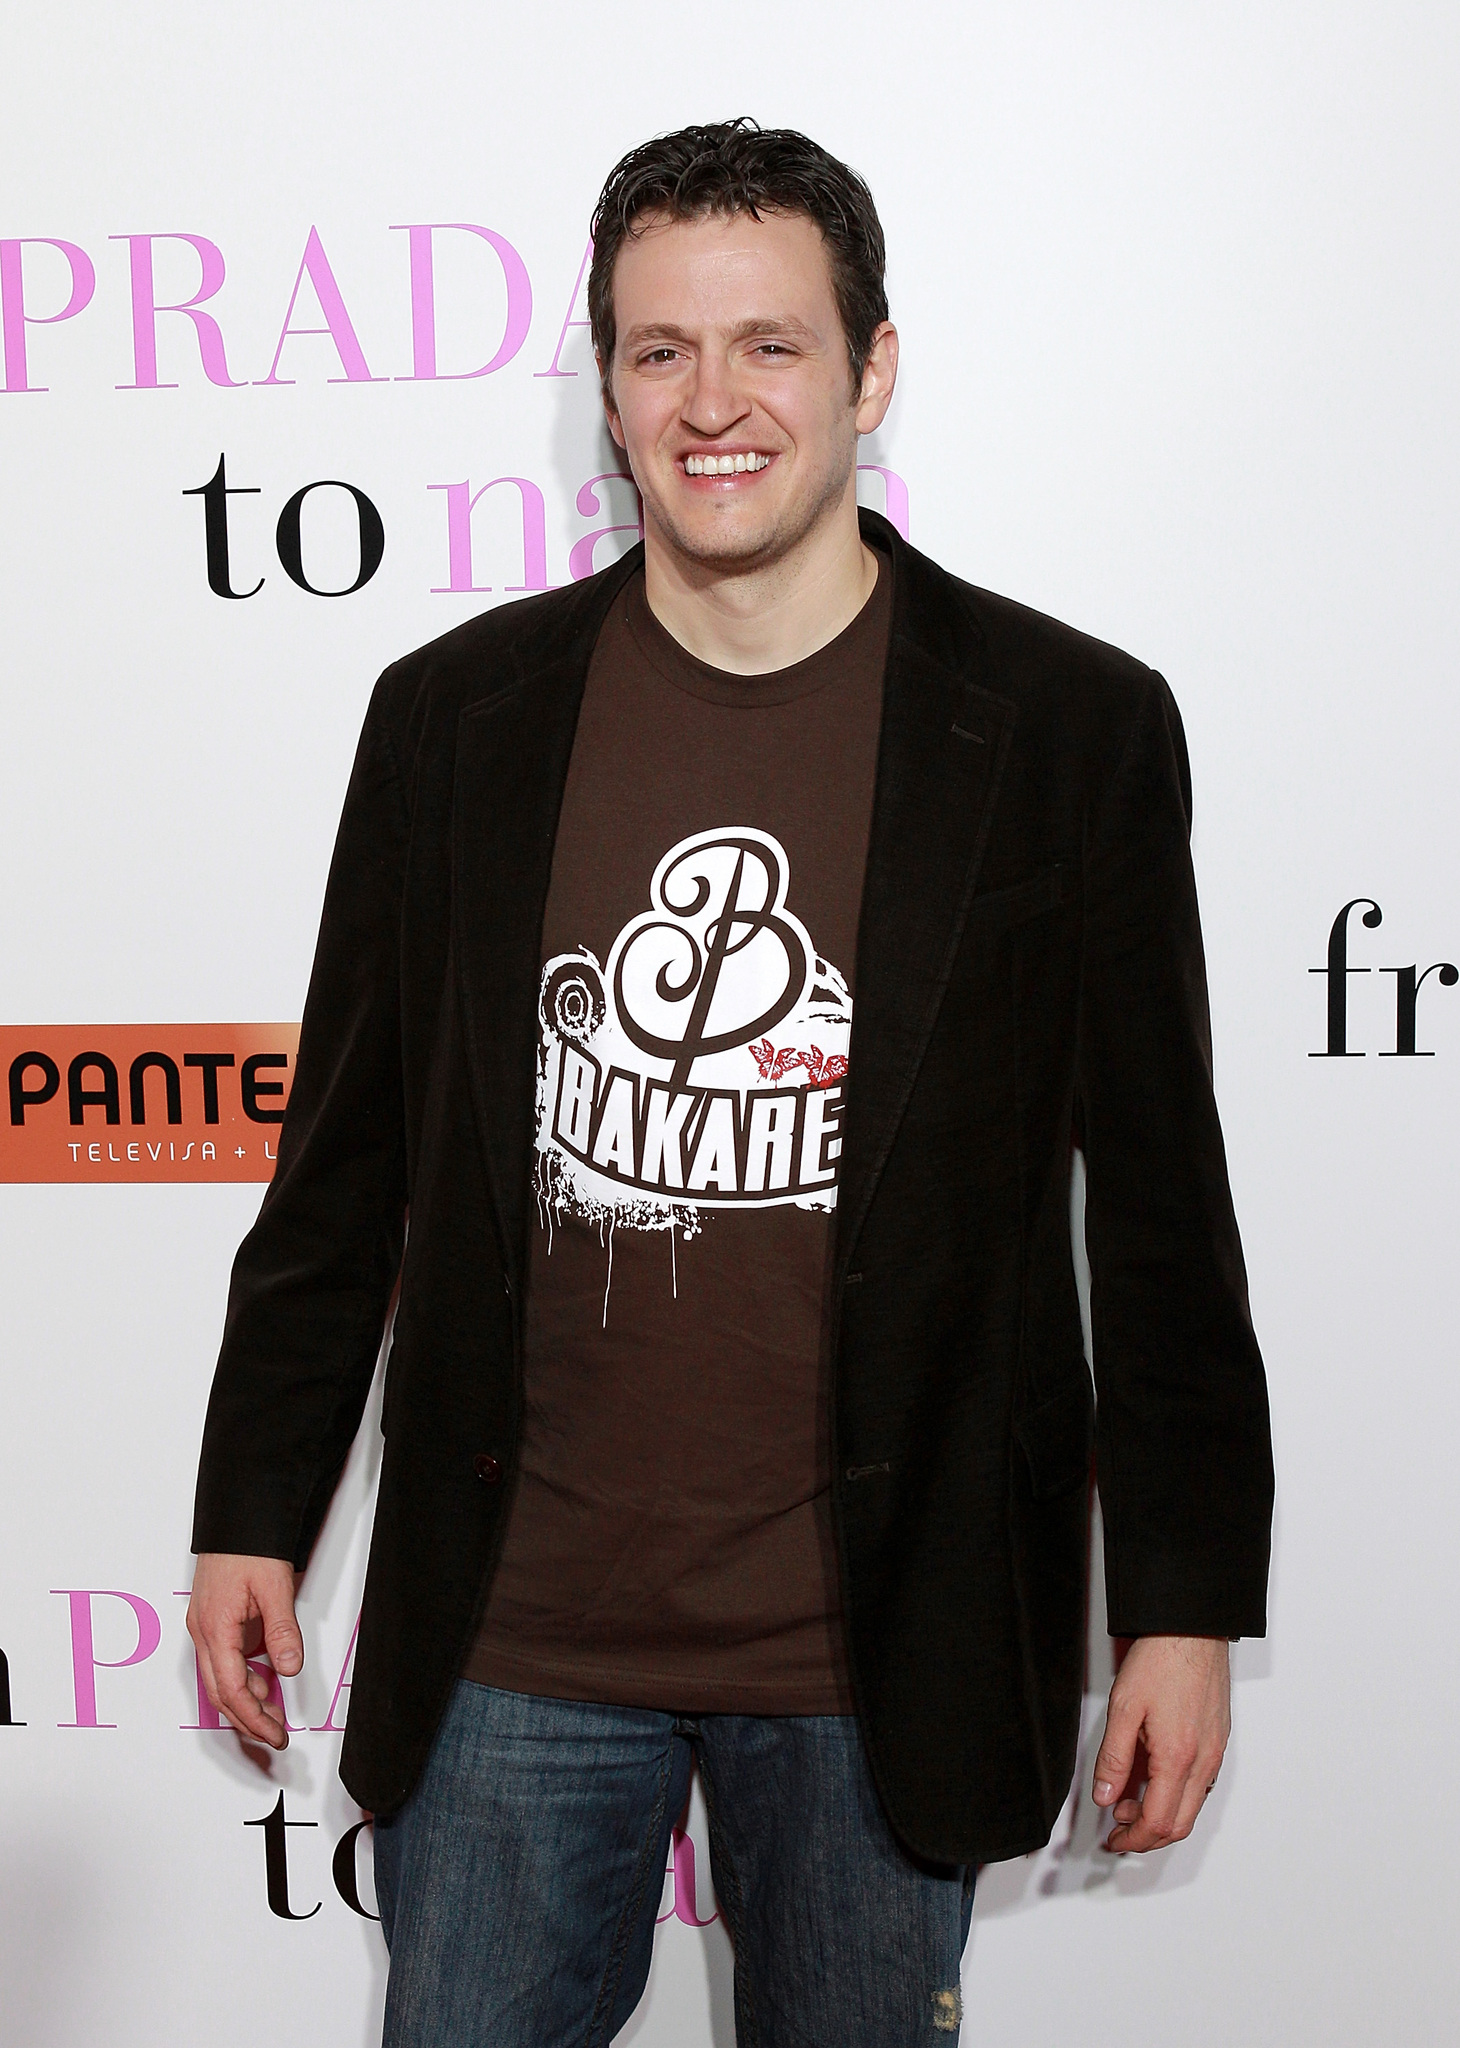 Tom Malloy at event of From Prada to Nada (2011)